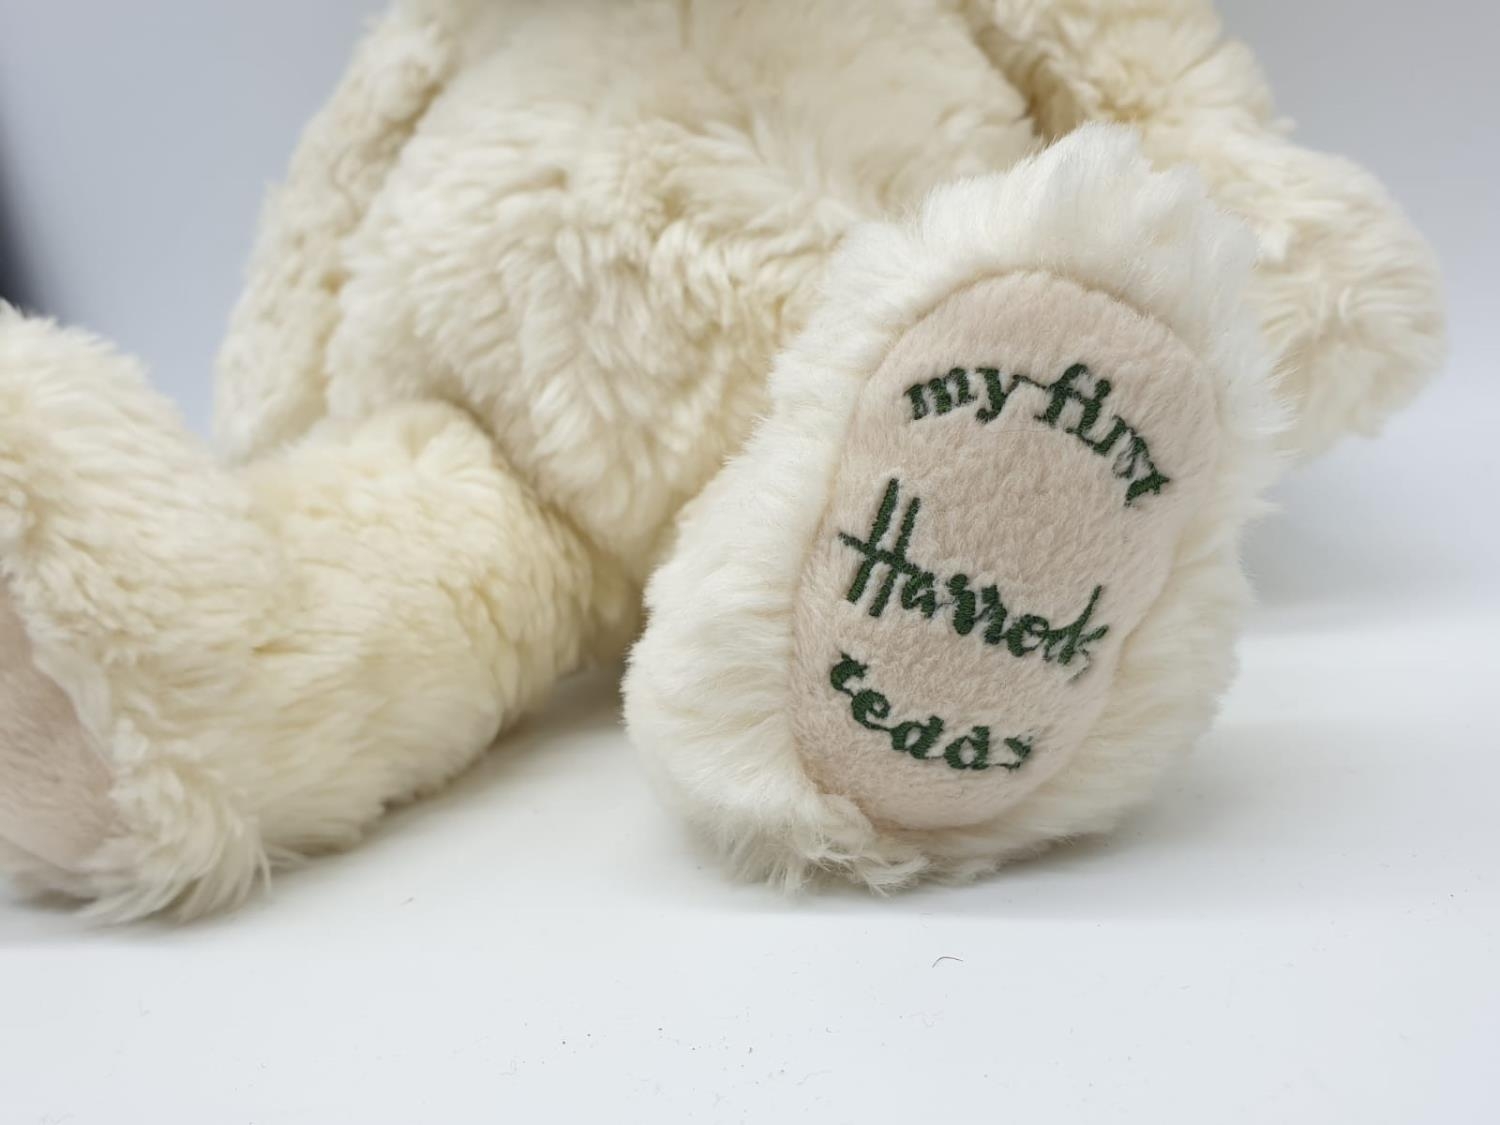 Two Harrods teddy bears, one being "My first Harrods teddy" and a traditional Harrods teddy. Approx. - Image 9 of 10